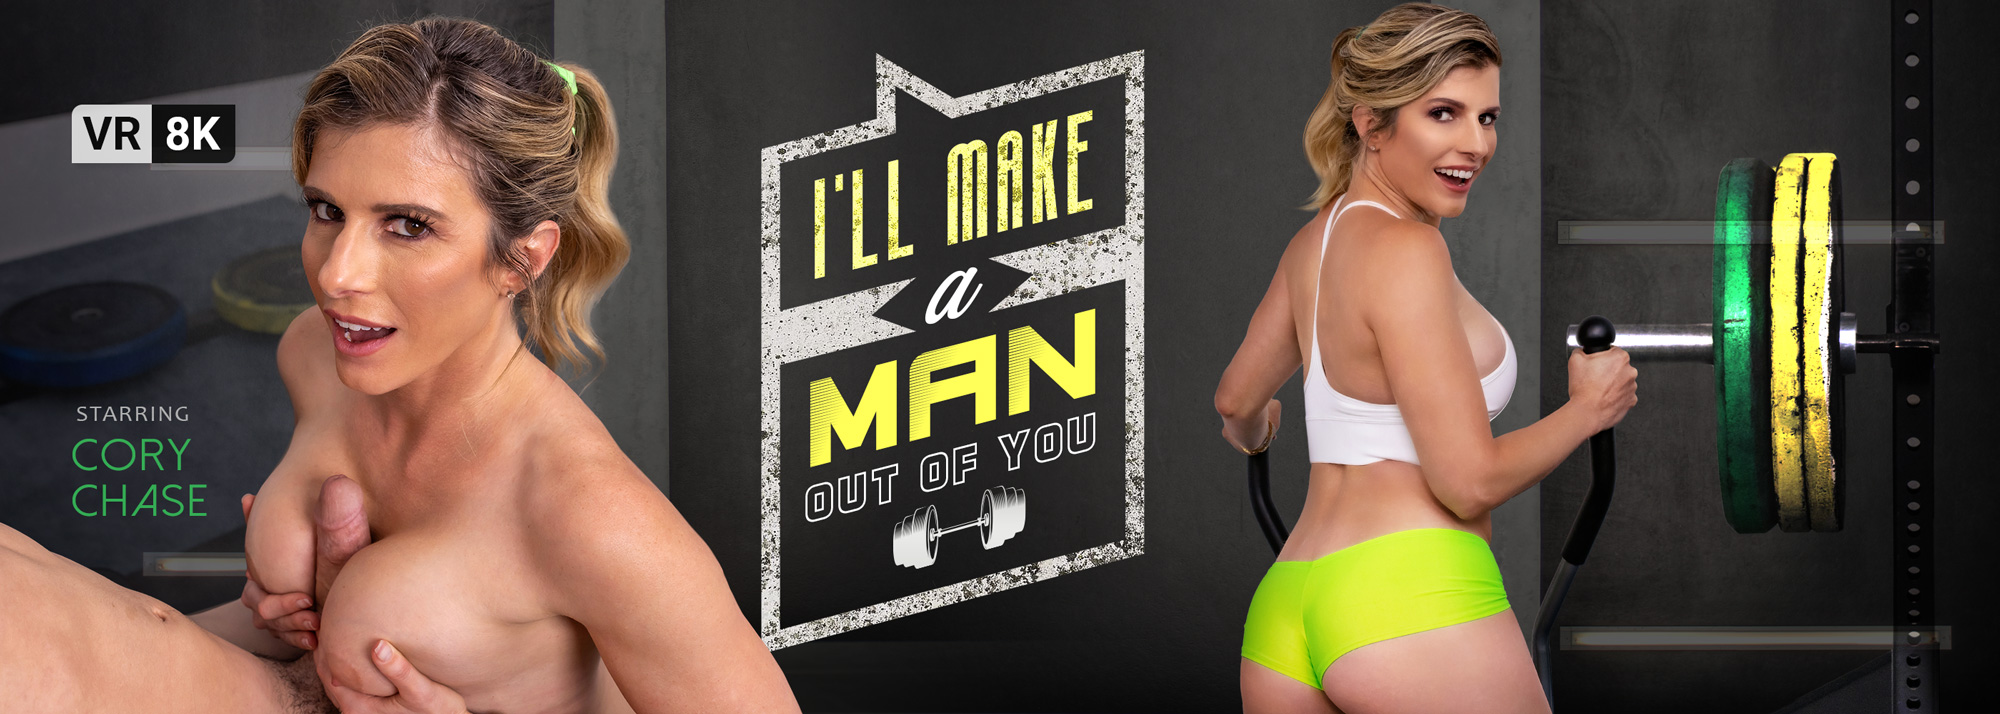 I'll Make a Man Out of You with Cory Chase  Slideshow